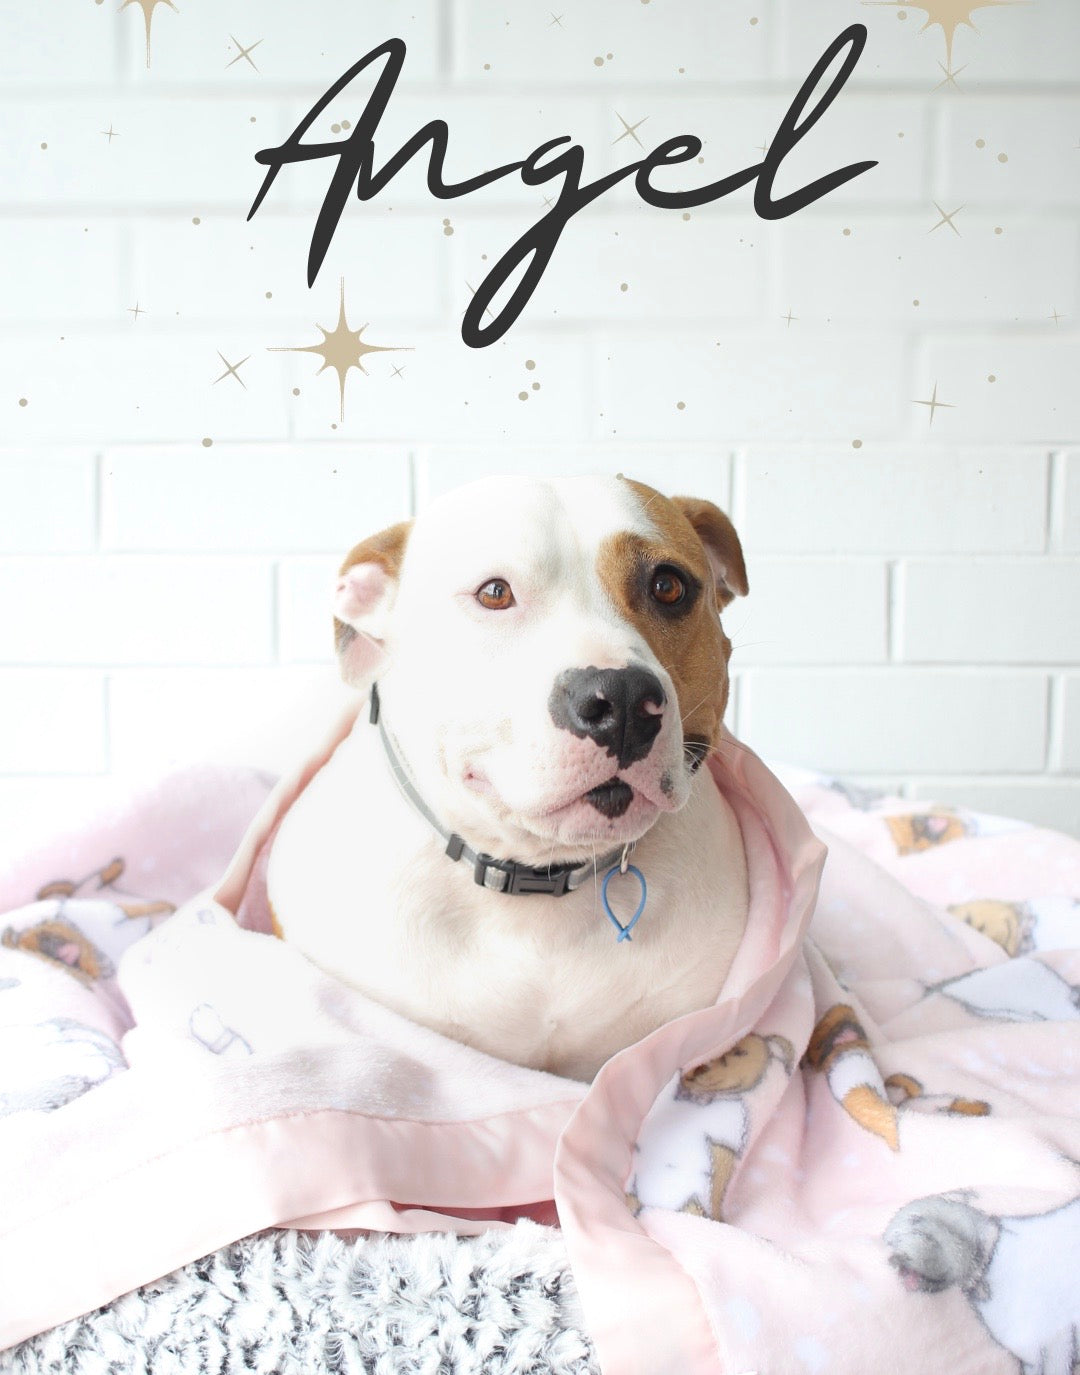 Angel is ADOPTED! - MEET ANGEL FROM GEELONG ANIMAL RESCUE